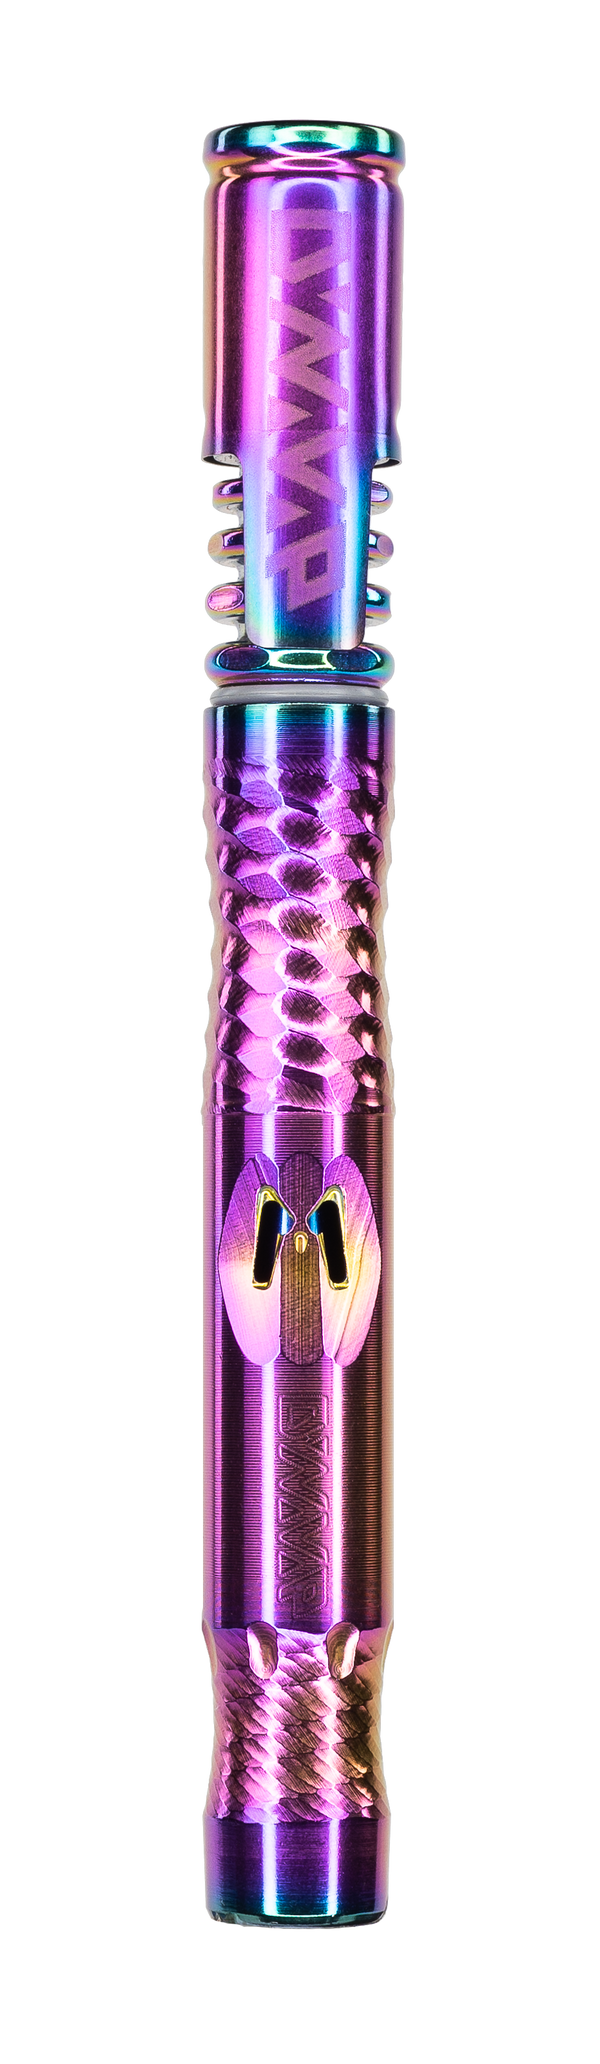 This is the DynaVap "M" in RosiuM finish (bright purple, yellow, pink rainbow finish) available at Ritual.